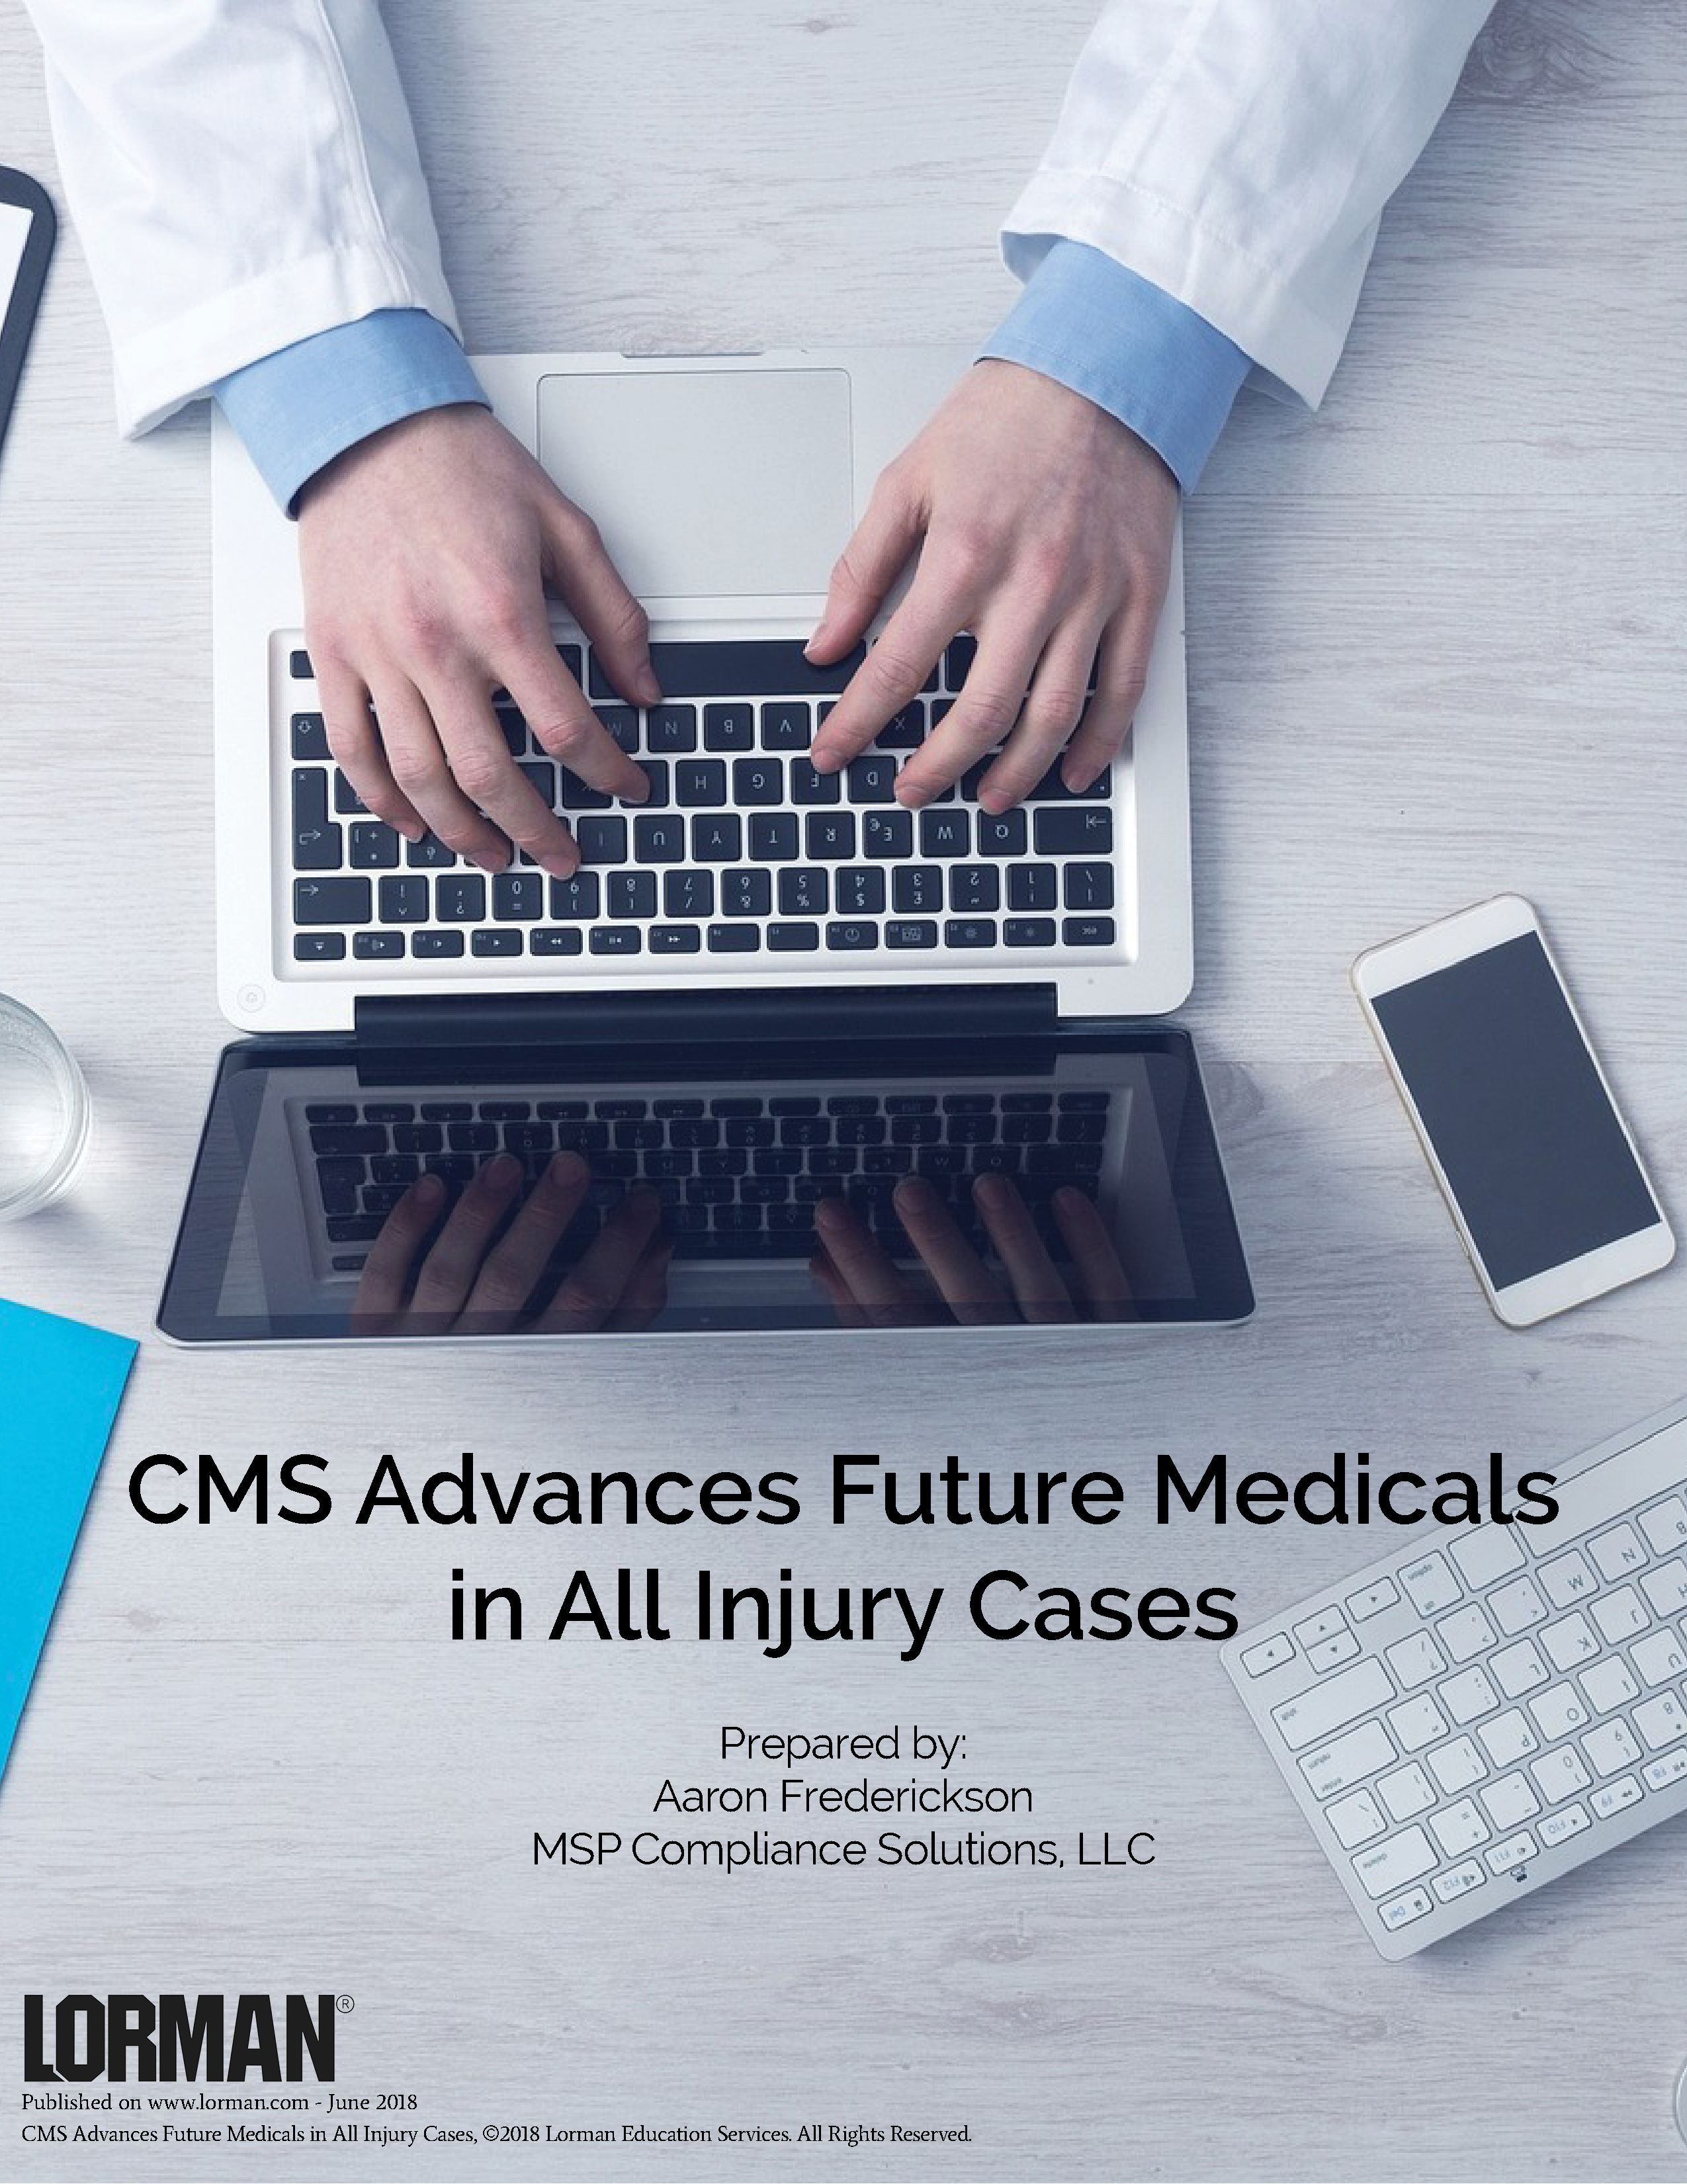 CMS Advances Future Medicals in All Injury Cases